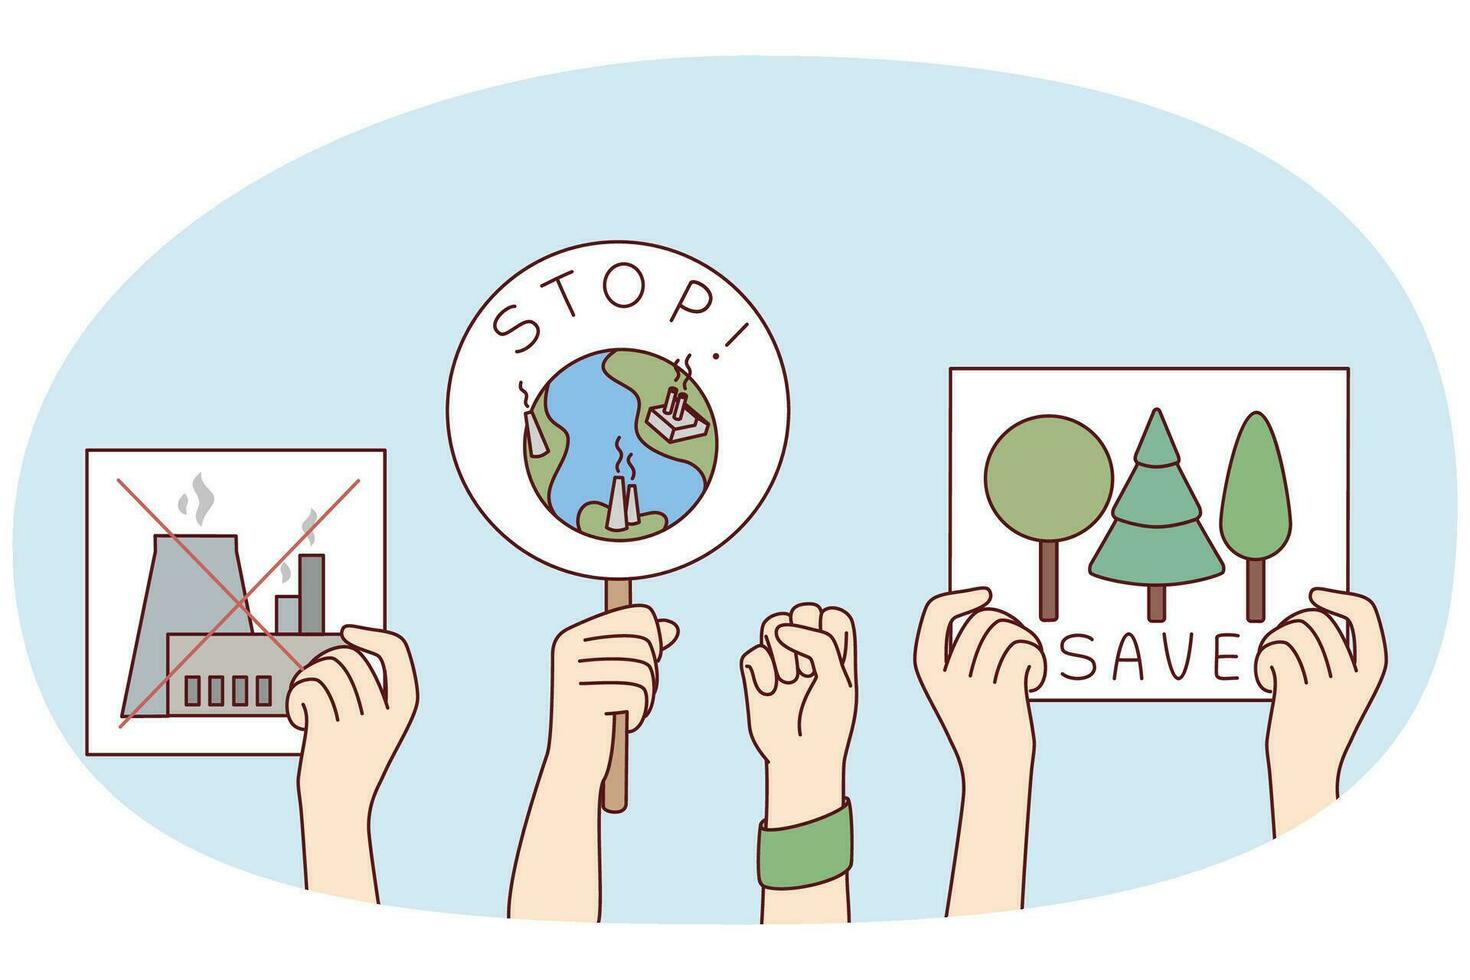 Hands of people showing posters and placards for planet protection. Activists demonstrate for environmental safety, ask to stop pollution. Vector illustration.